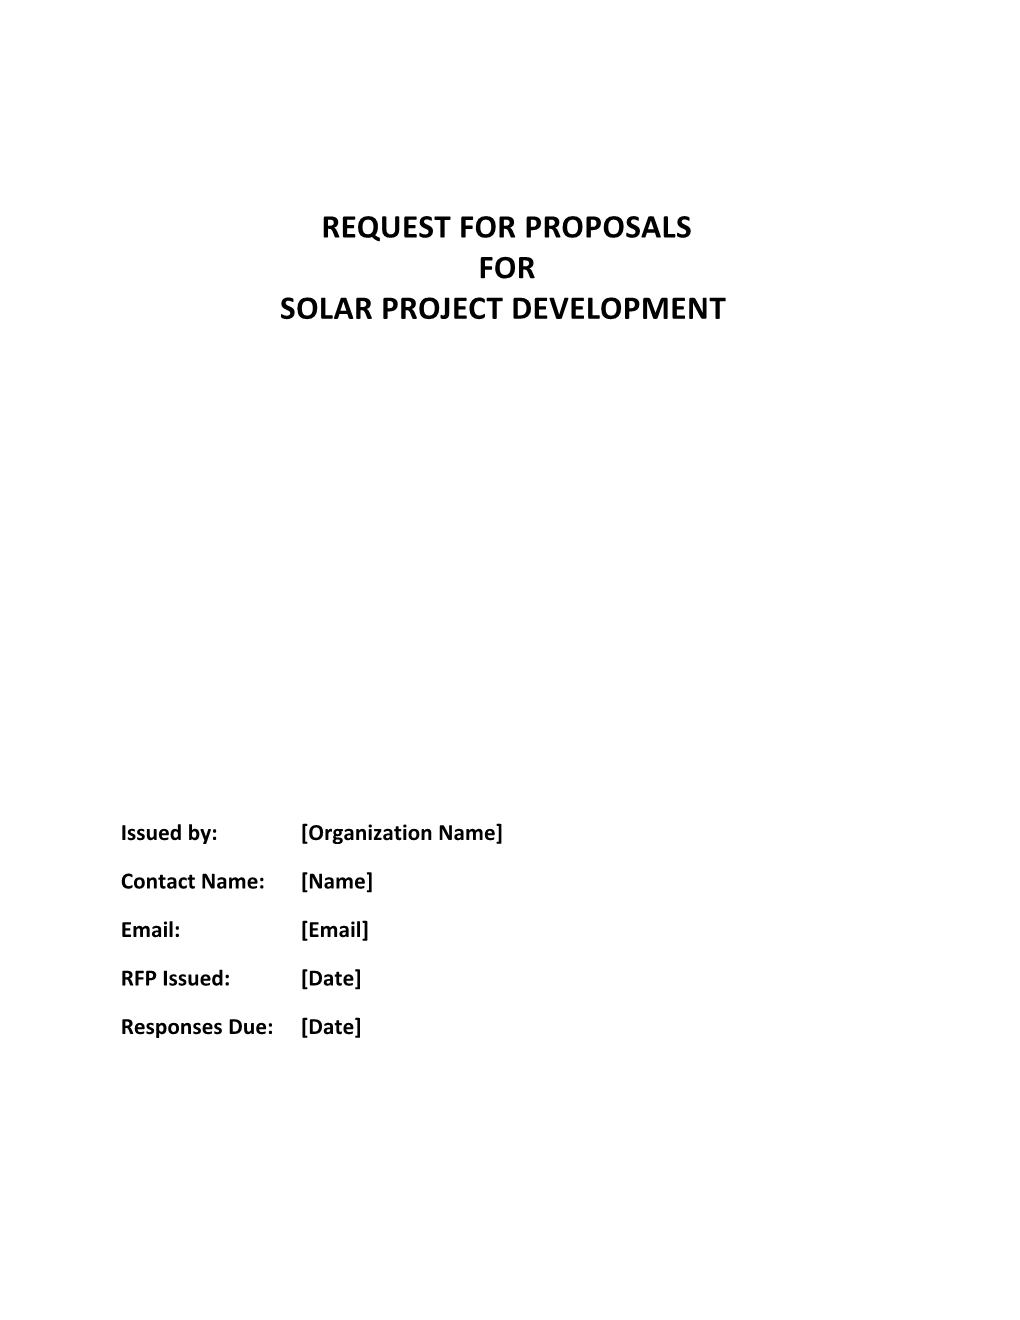 Request for Proposals for Solar Project Development